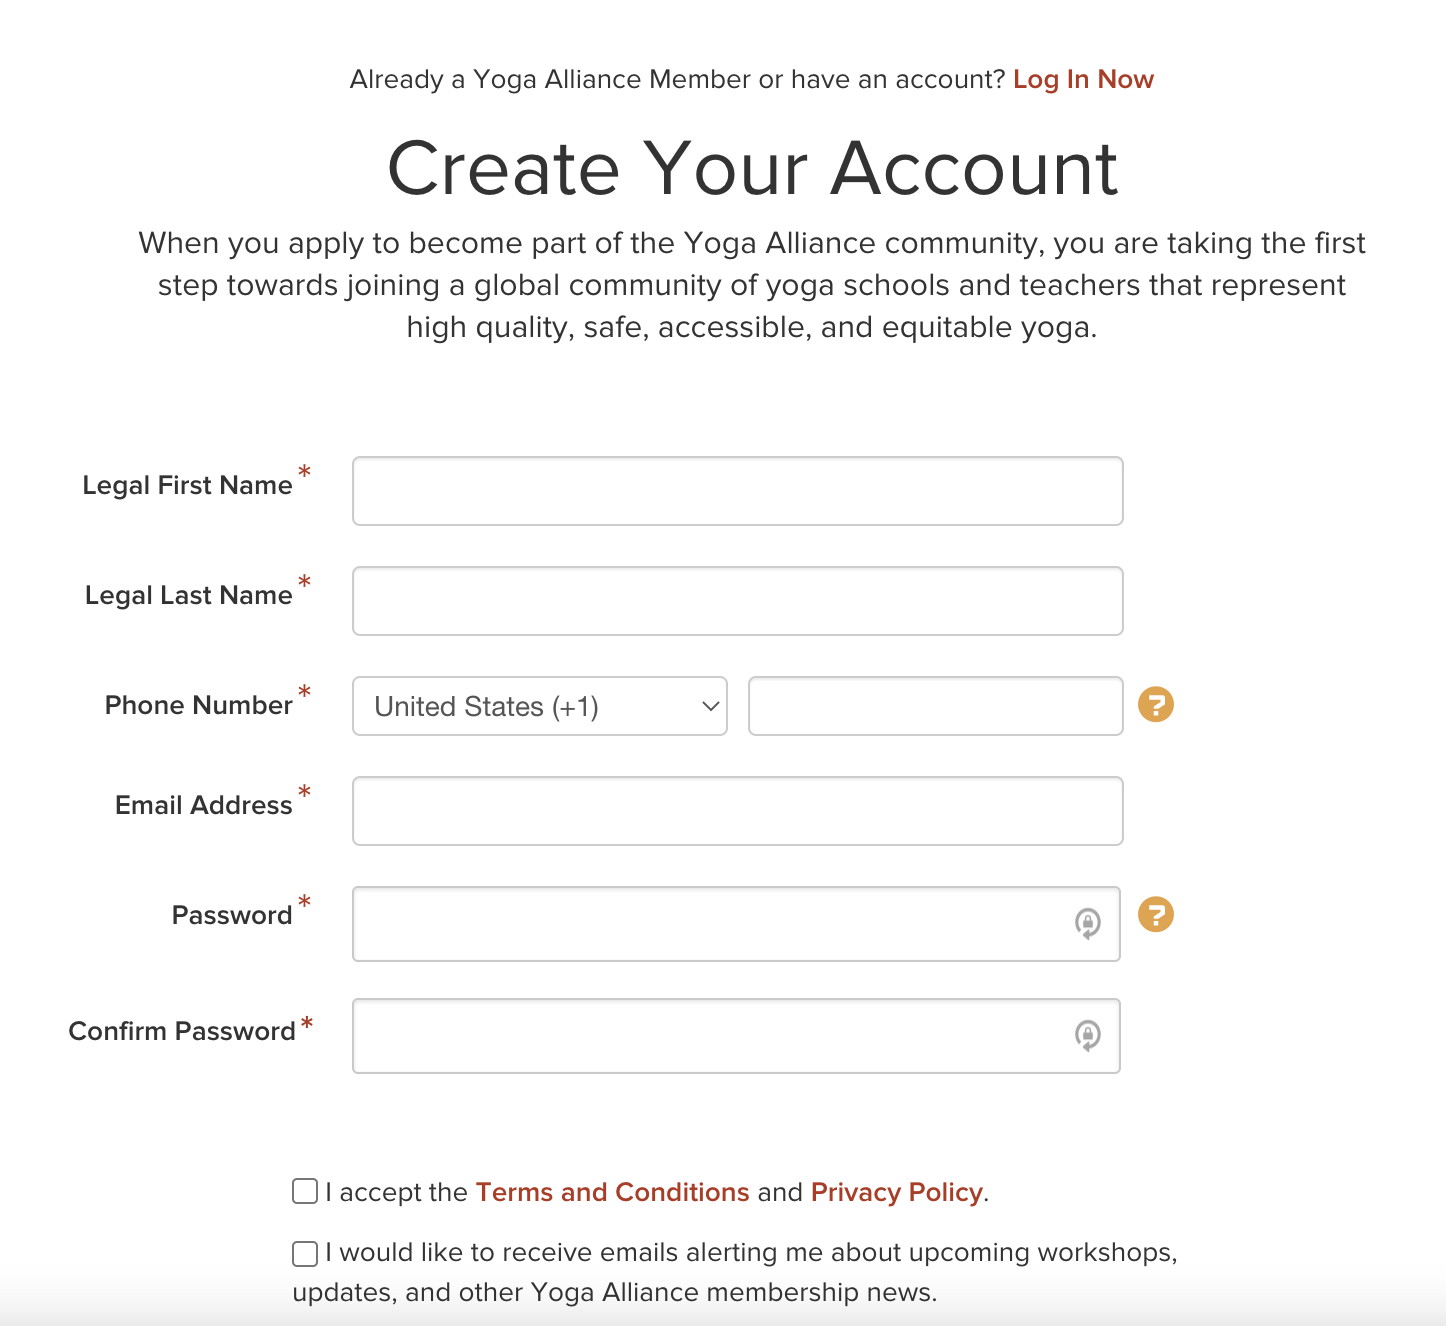 How to Register Your YTT Certificate With Yoga Alliance (With